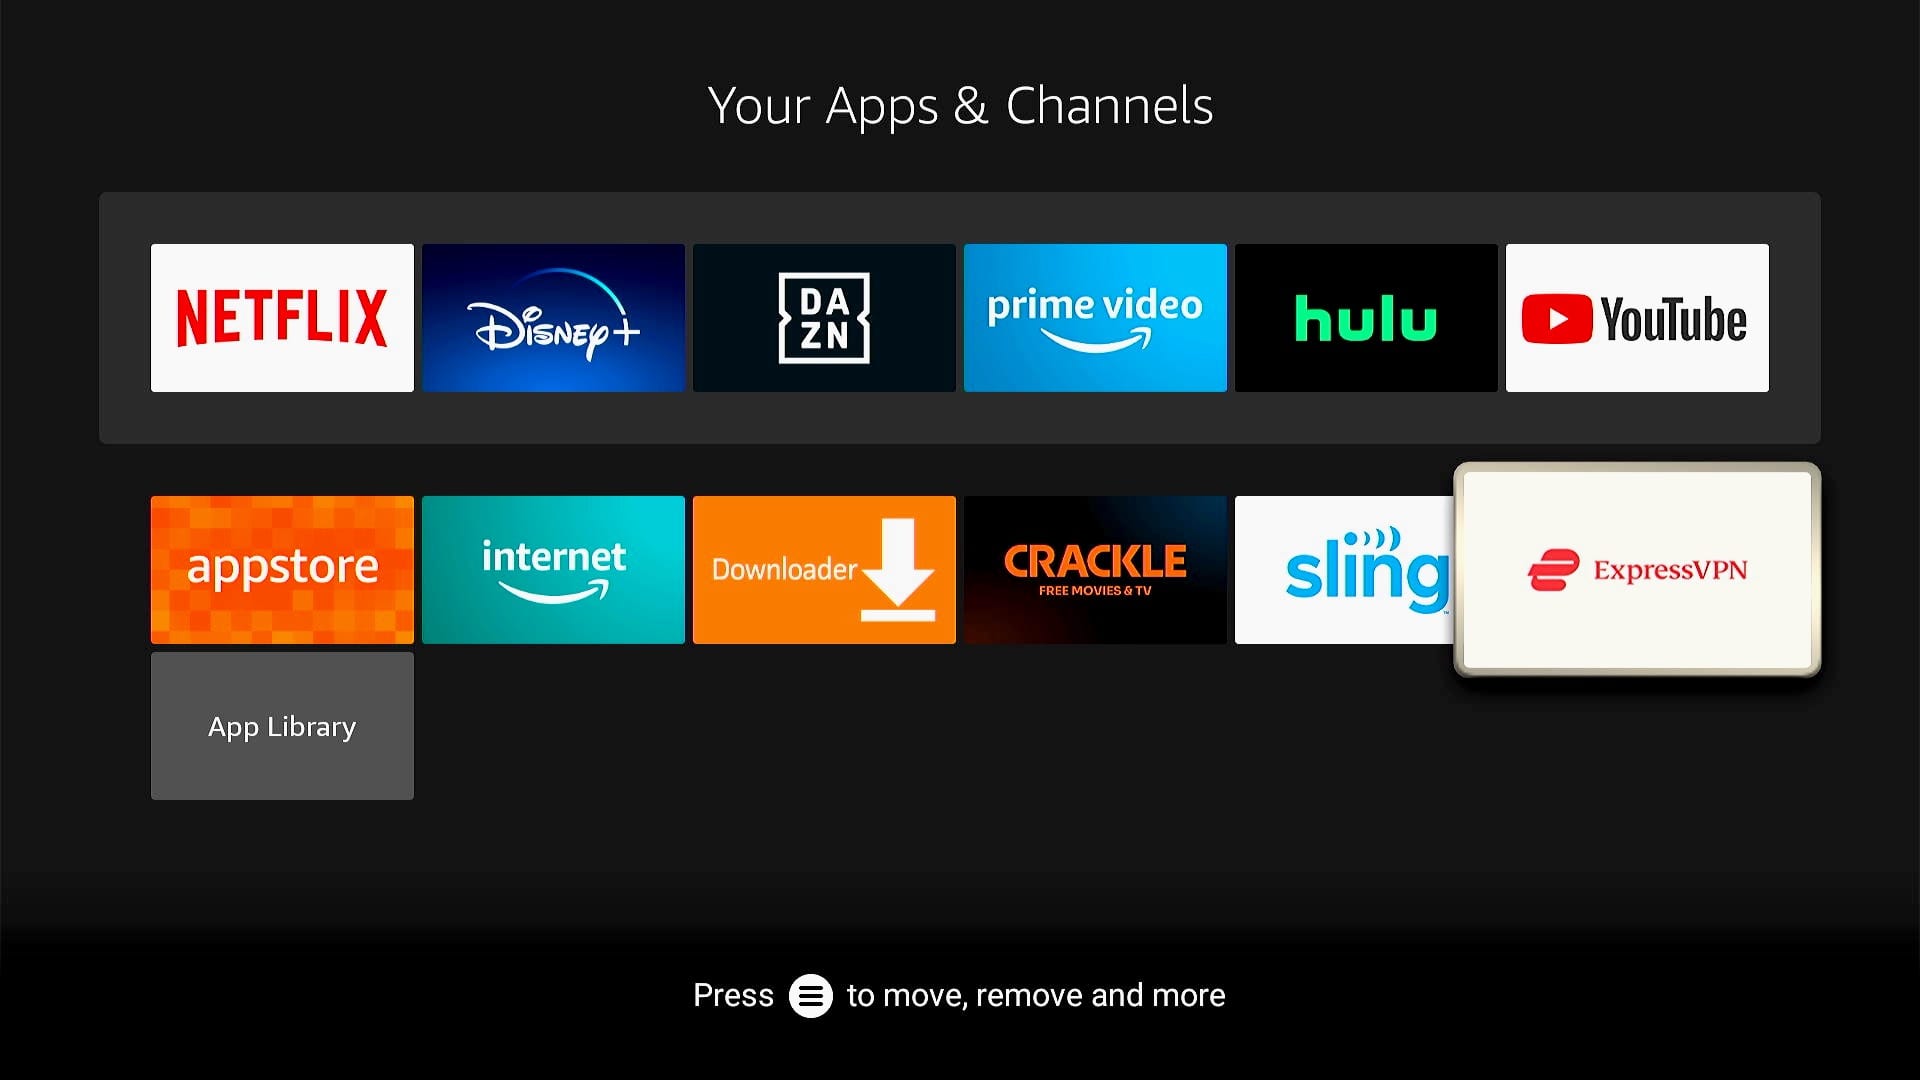 The ExpressVPN app located within the Fire TV Apps menu